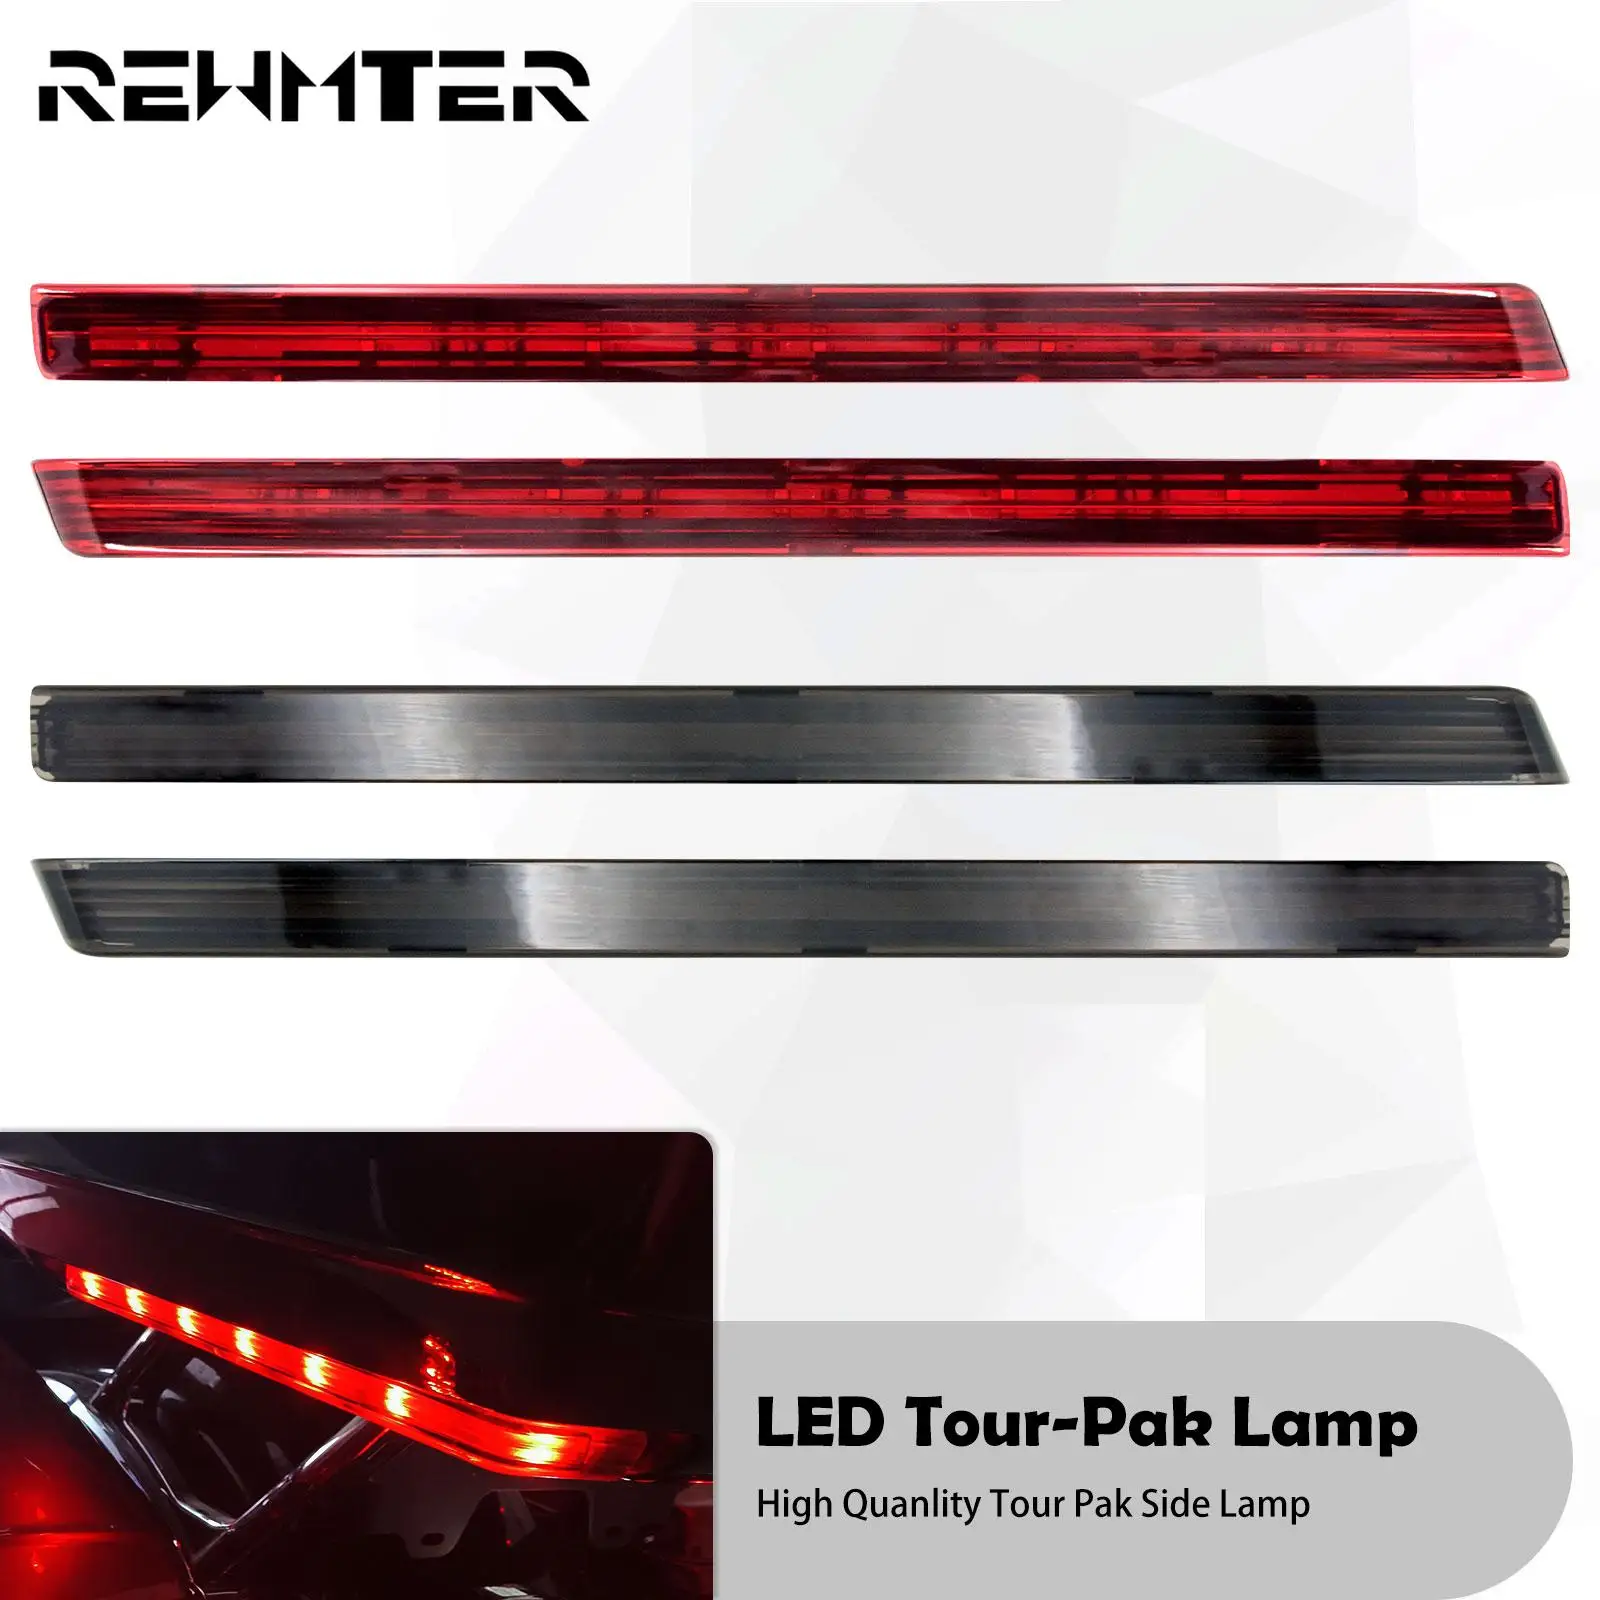 

Motorcycle Tour Pak Pack Accent Side Panel LED Light Red/Smoke Lens For Harley Touring Road King Road Street Glide FLTRX 2006-21